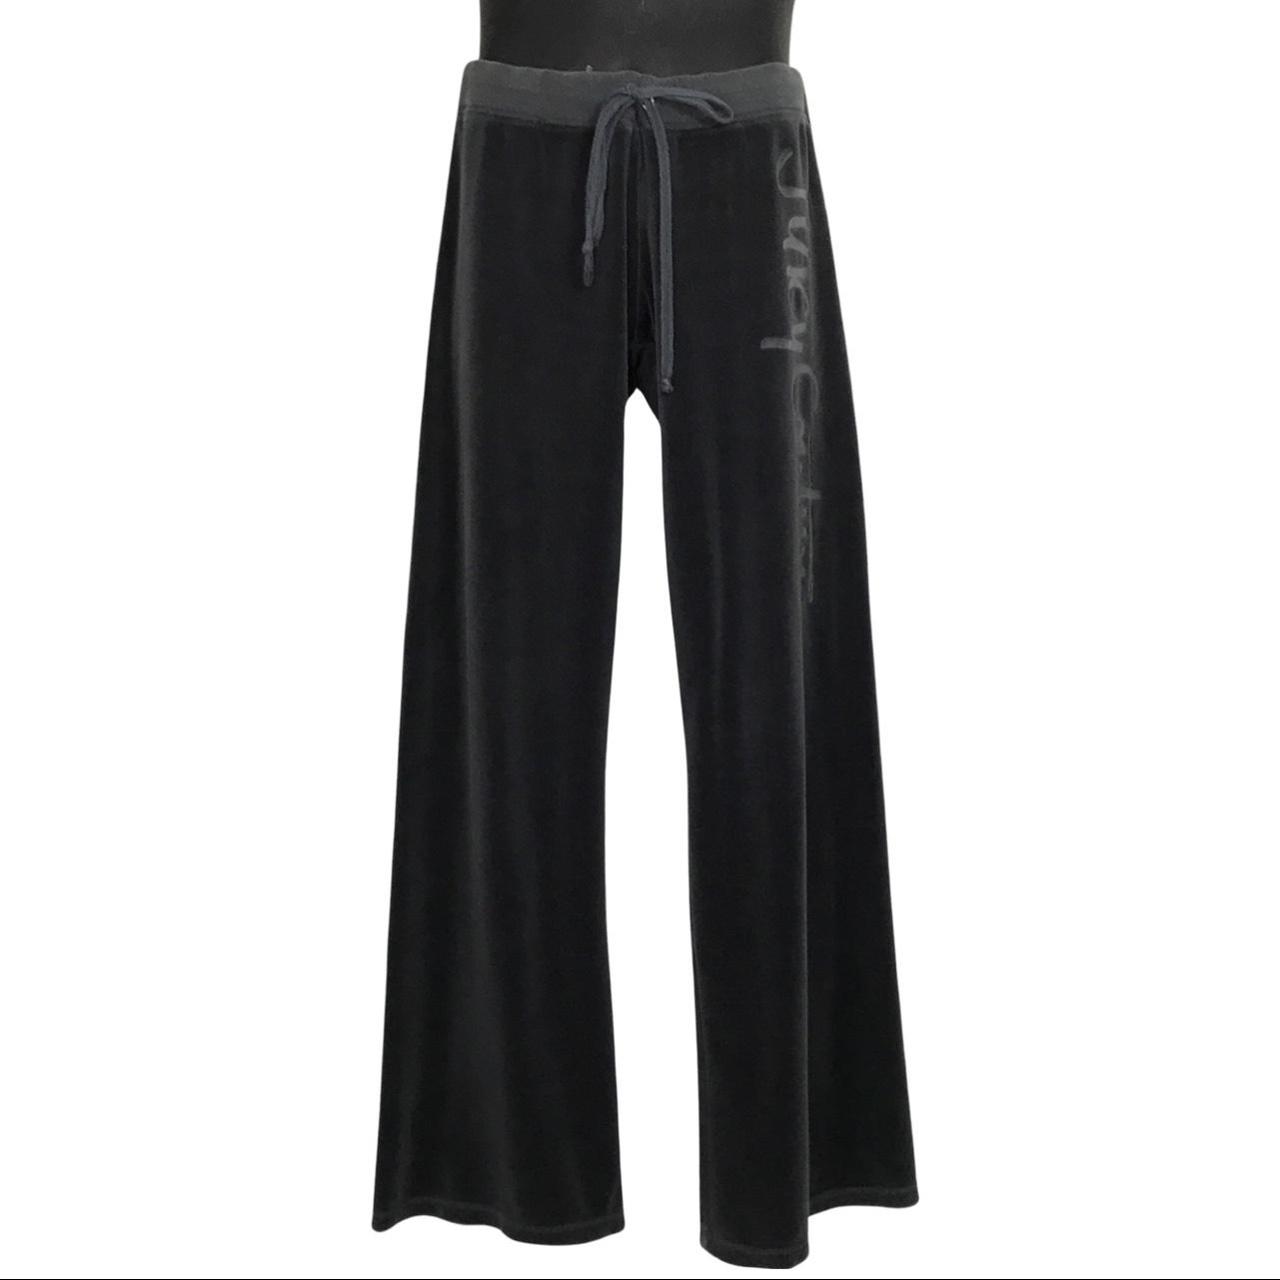 Juicy Couture Women's Black Joggers-tracksuits (2)